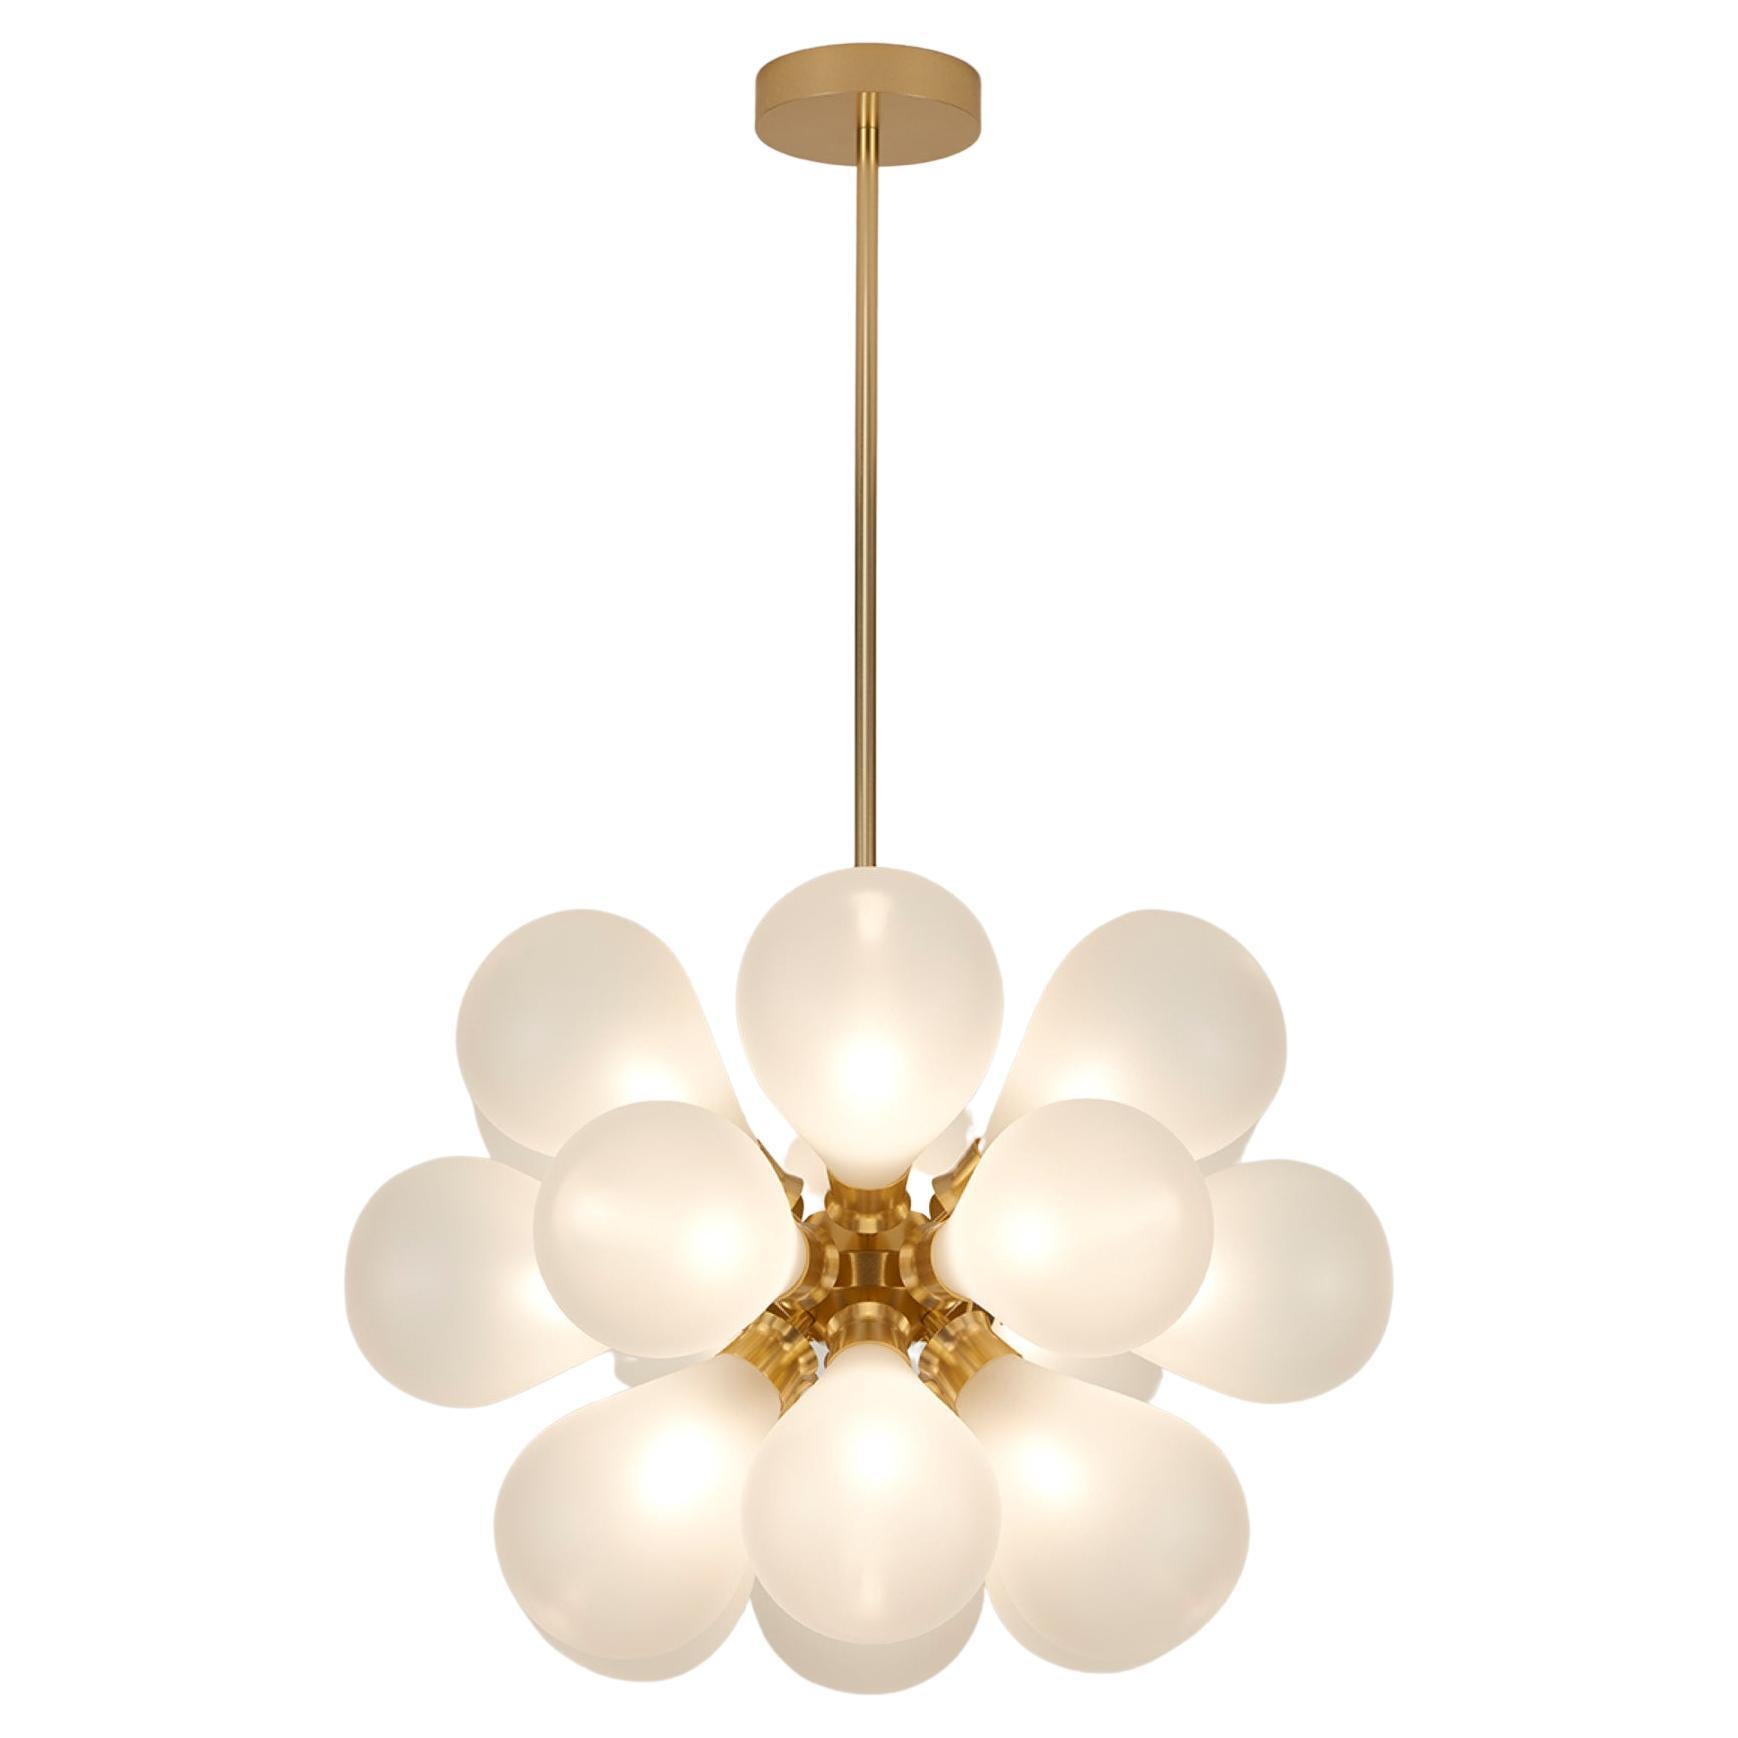 Cintola Maxi Pendant in Satin Gold with 18 Handblown Frosted Glass Globes For Sale